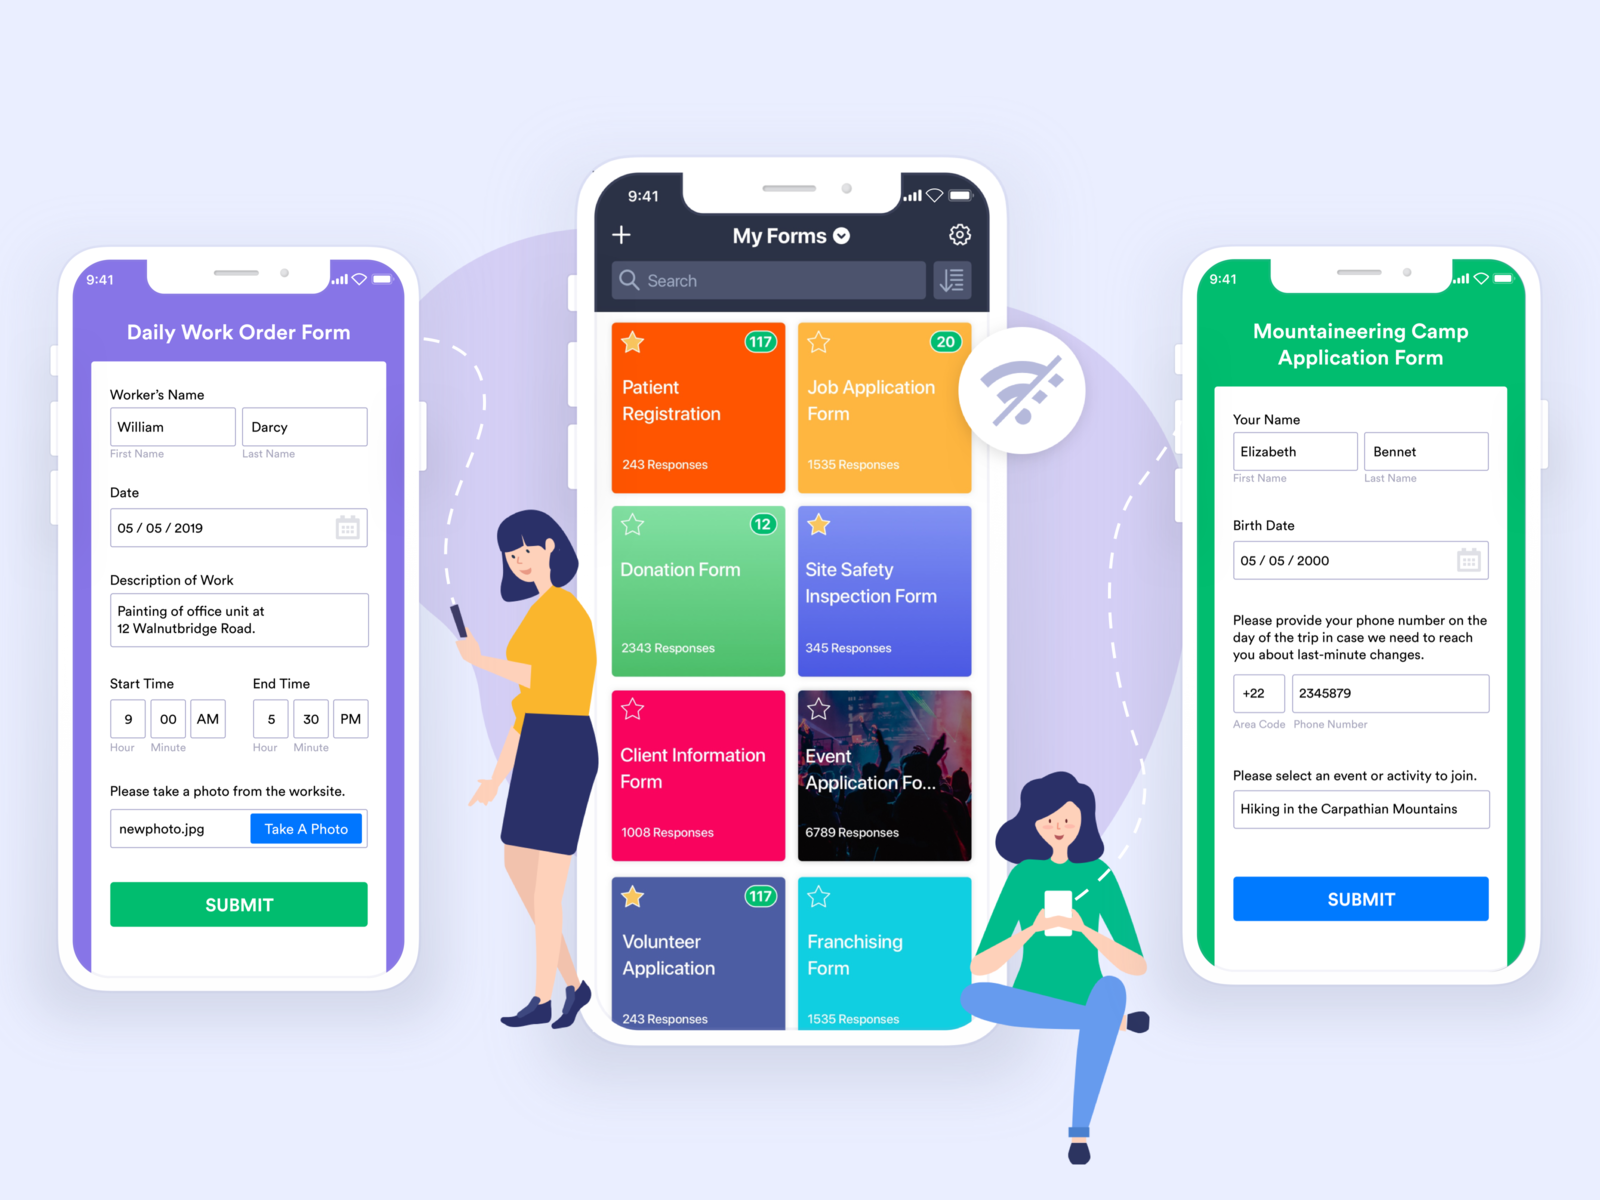 jotform-mobile-forms-by-mercan-alper-on-dribbble